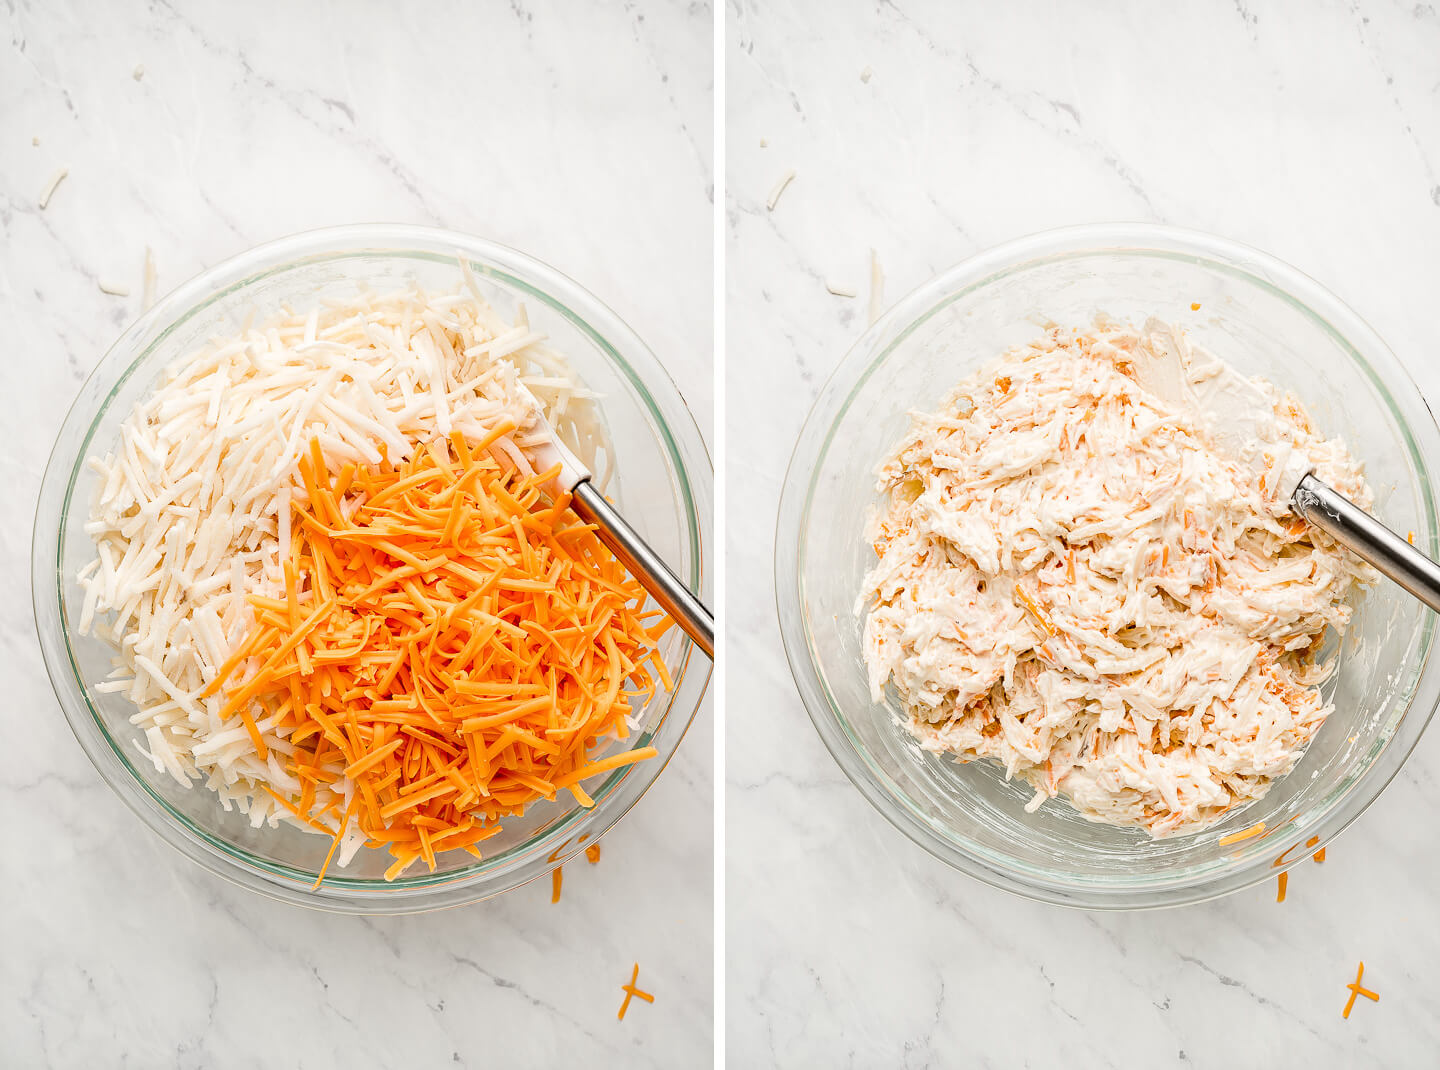 Diptych- Glass bowl of shredded potatoes and cheddar cheese; mixed together with cream mixture.